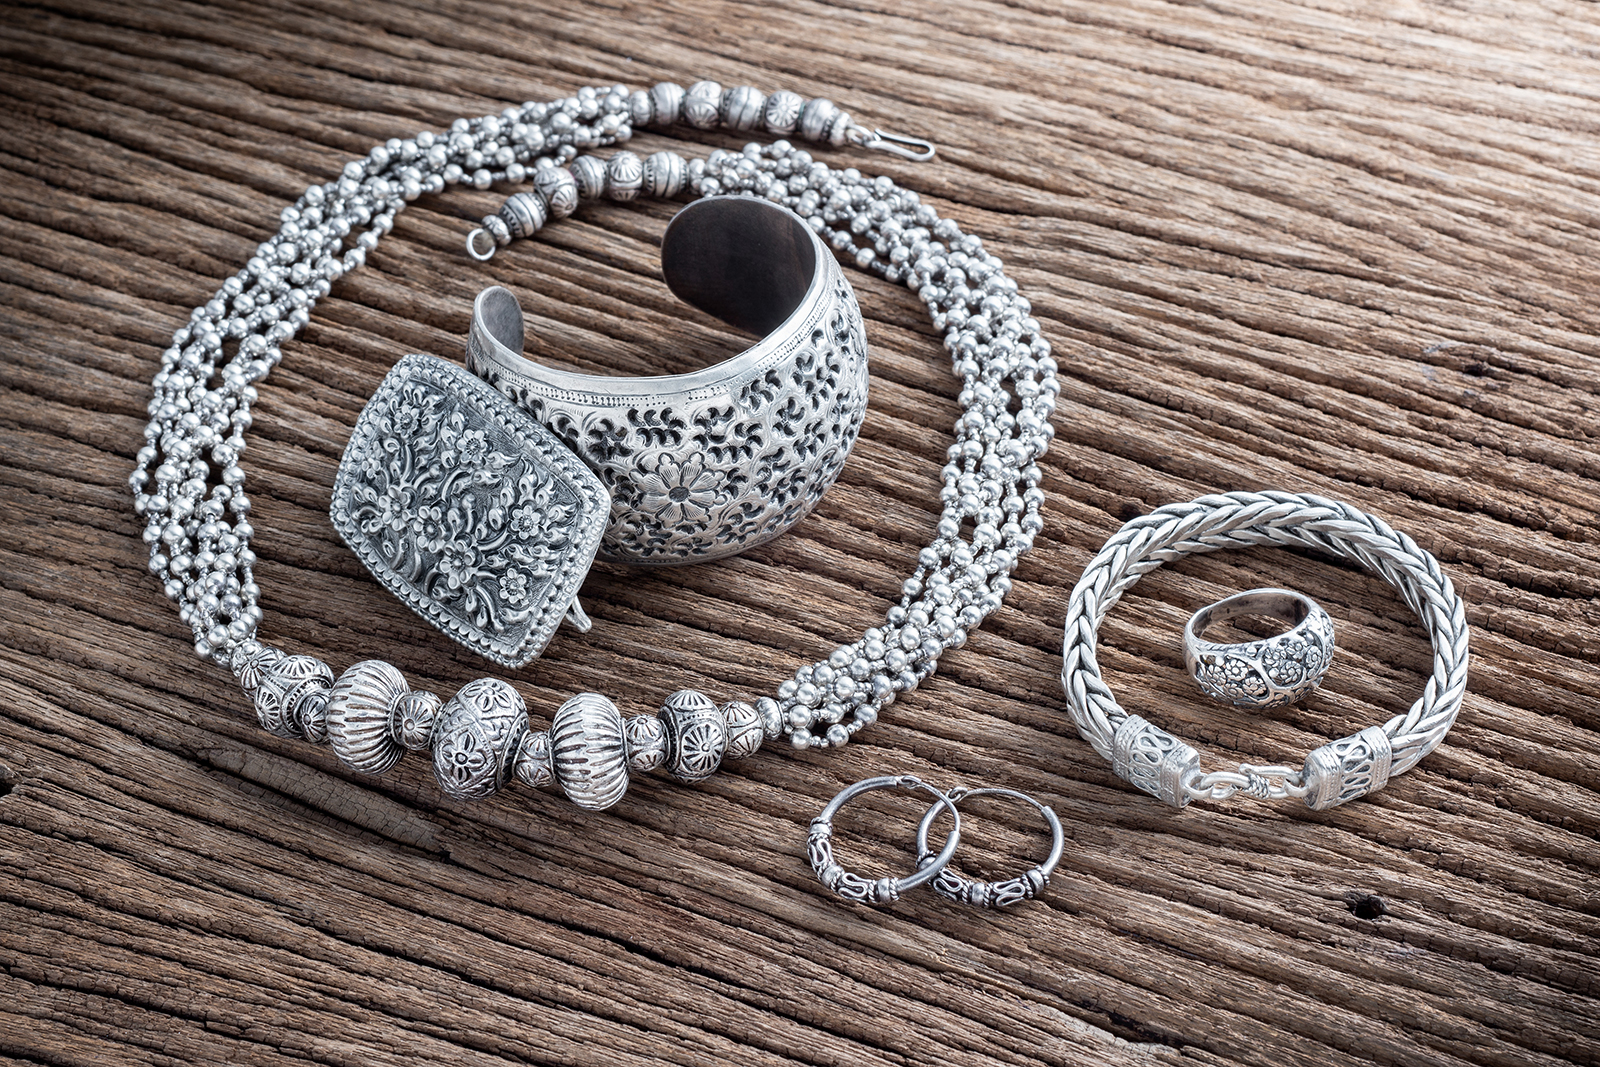 How to Clean Silver Jewelry for a Beautiful Shine